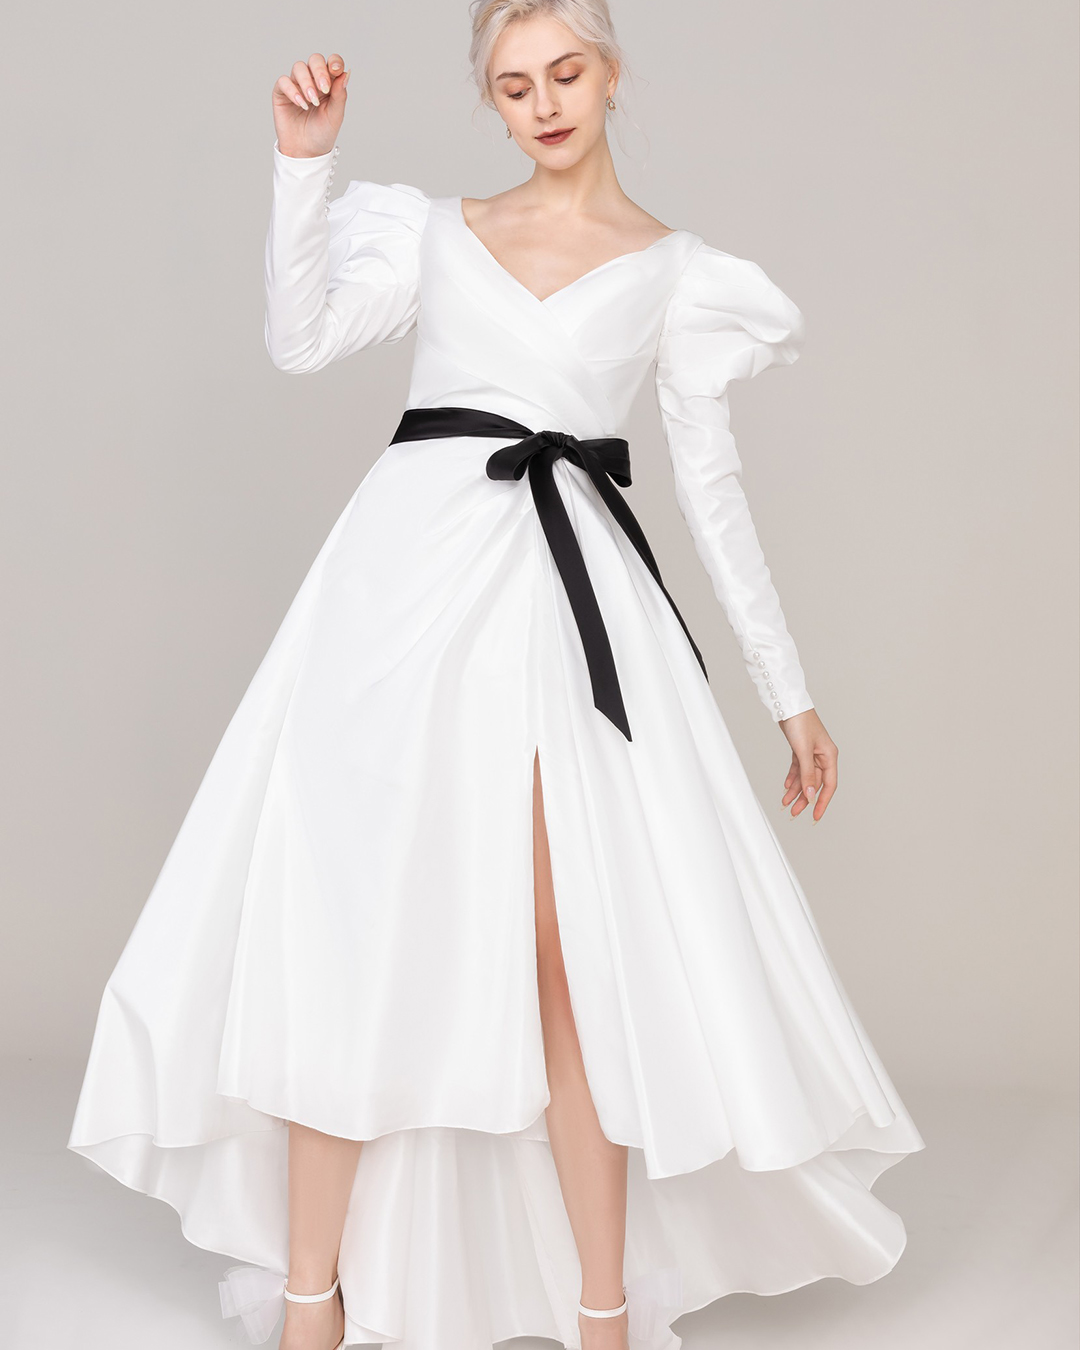 high low wedding dresses simple with long sleeves black belt cocomelody